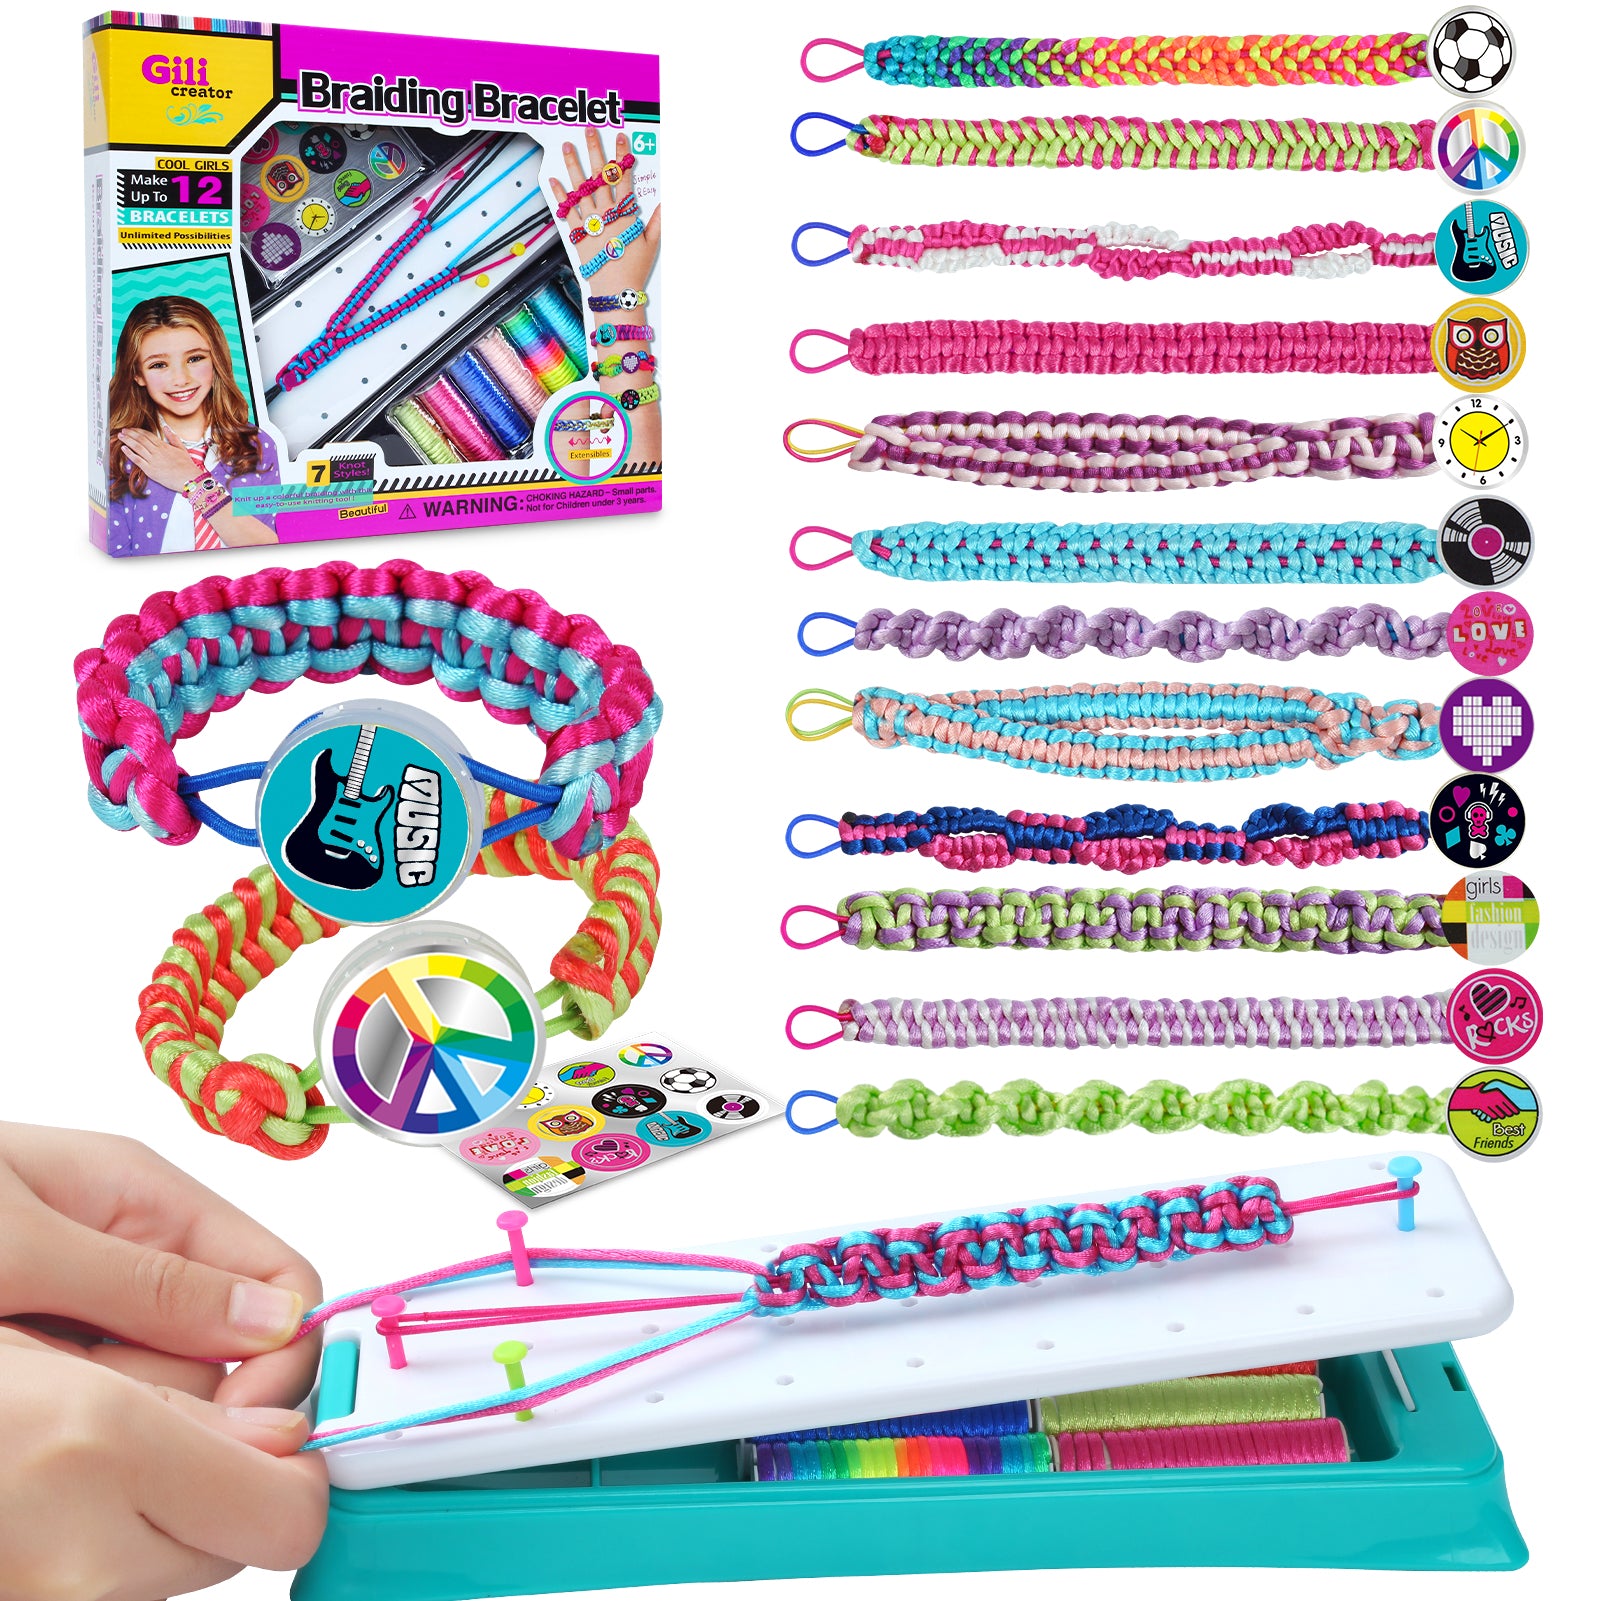 PURPLE LADYBUG Make Your Own Bracelet Kit for Girls - Cool Girls Crafts  Ages 8-12, Great Gifts for 10 Year Old Girl - Unique Jewelry Making Kit for